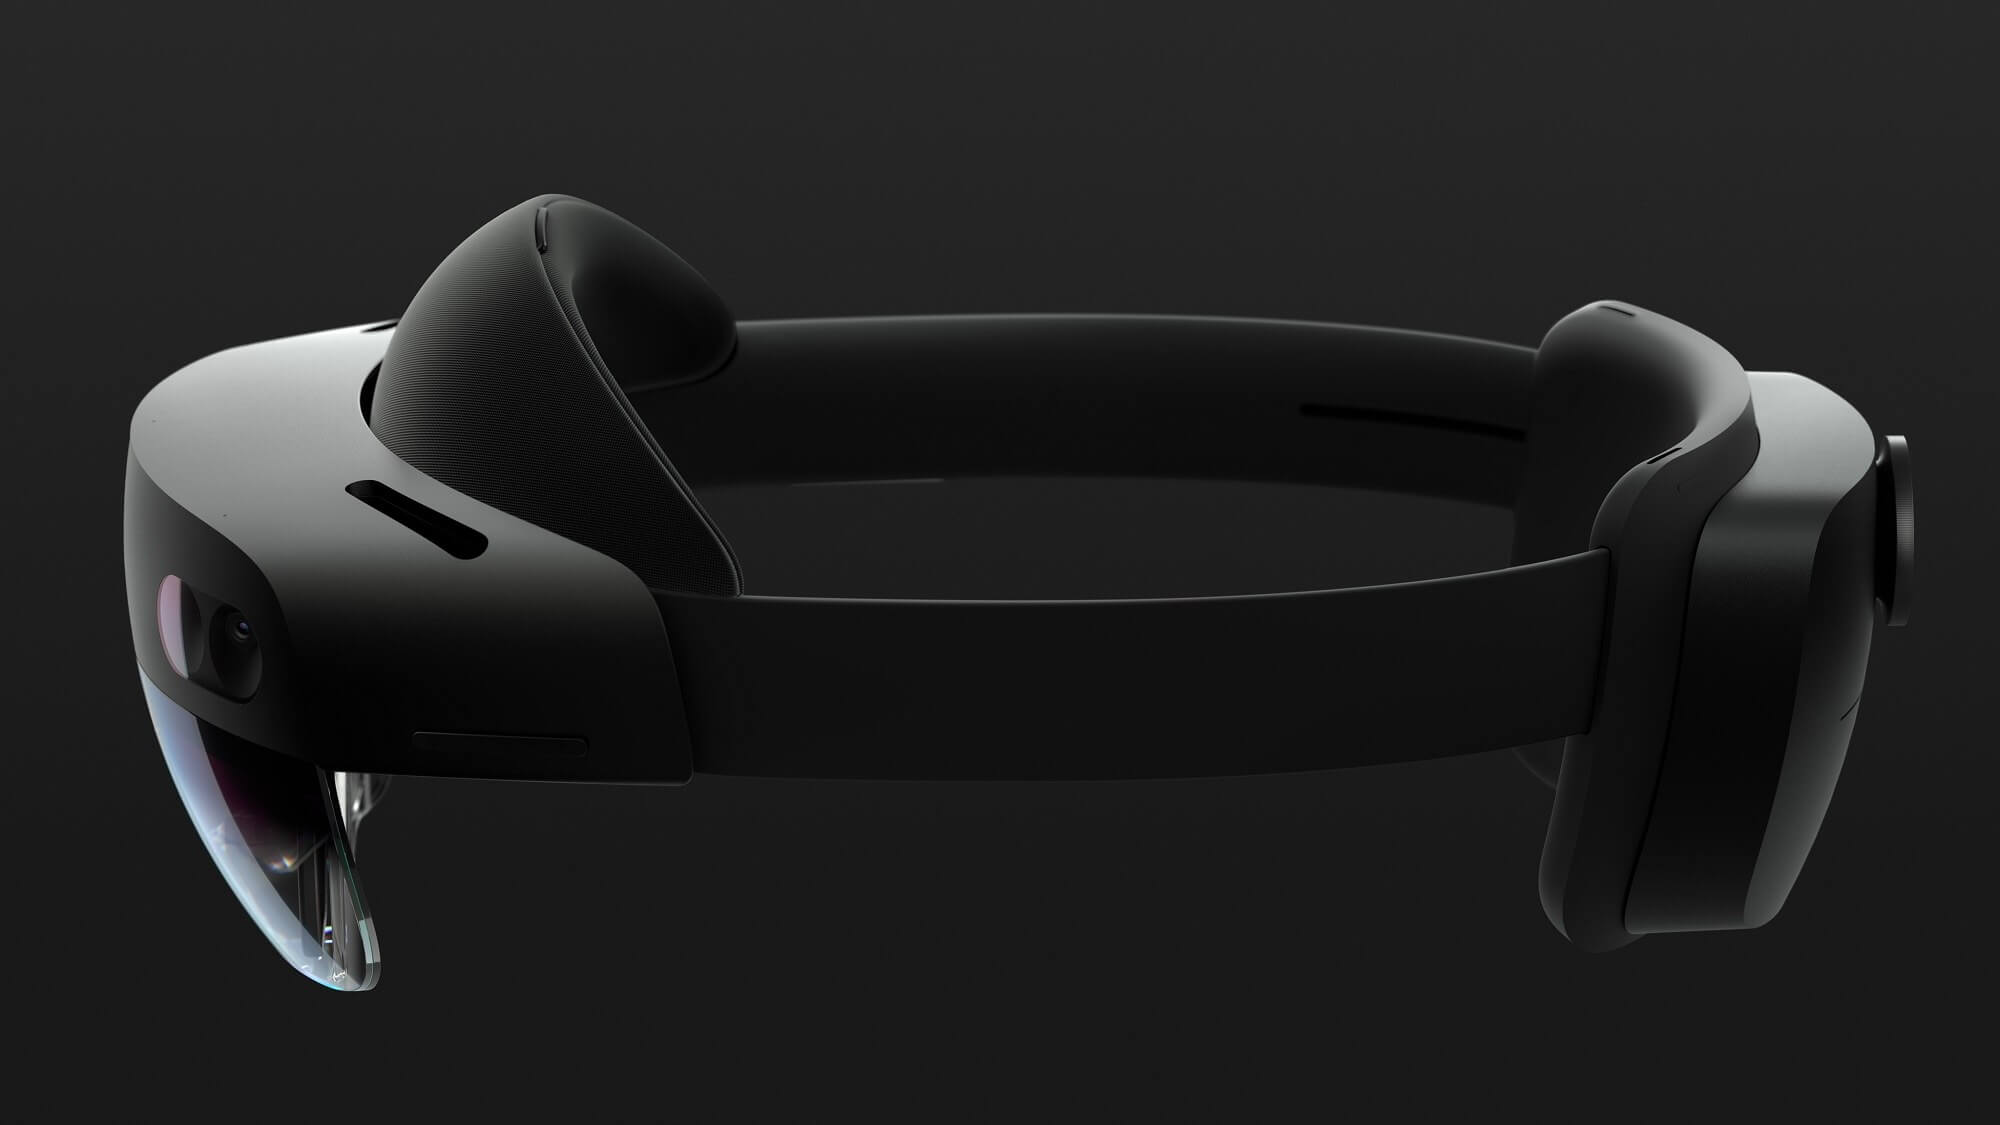 Microsoft unveils the HoloLens 2: better, lighter, and more immersive